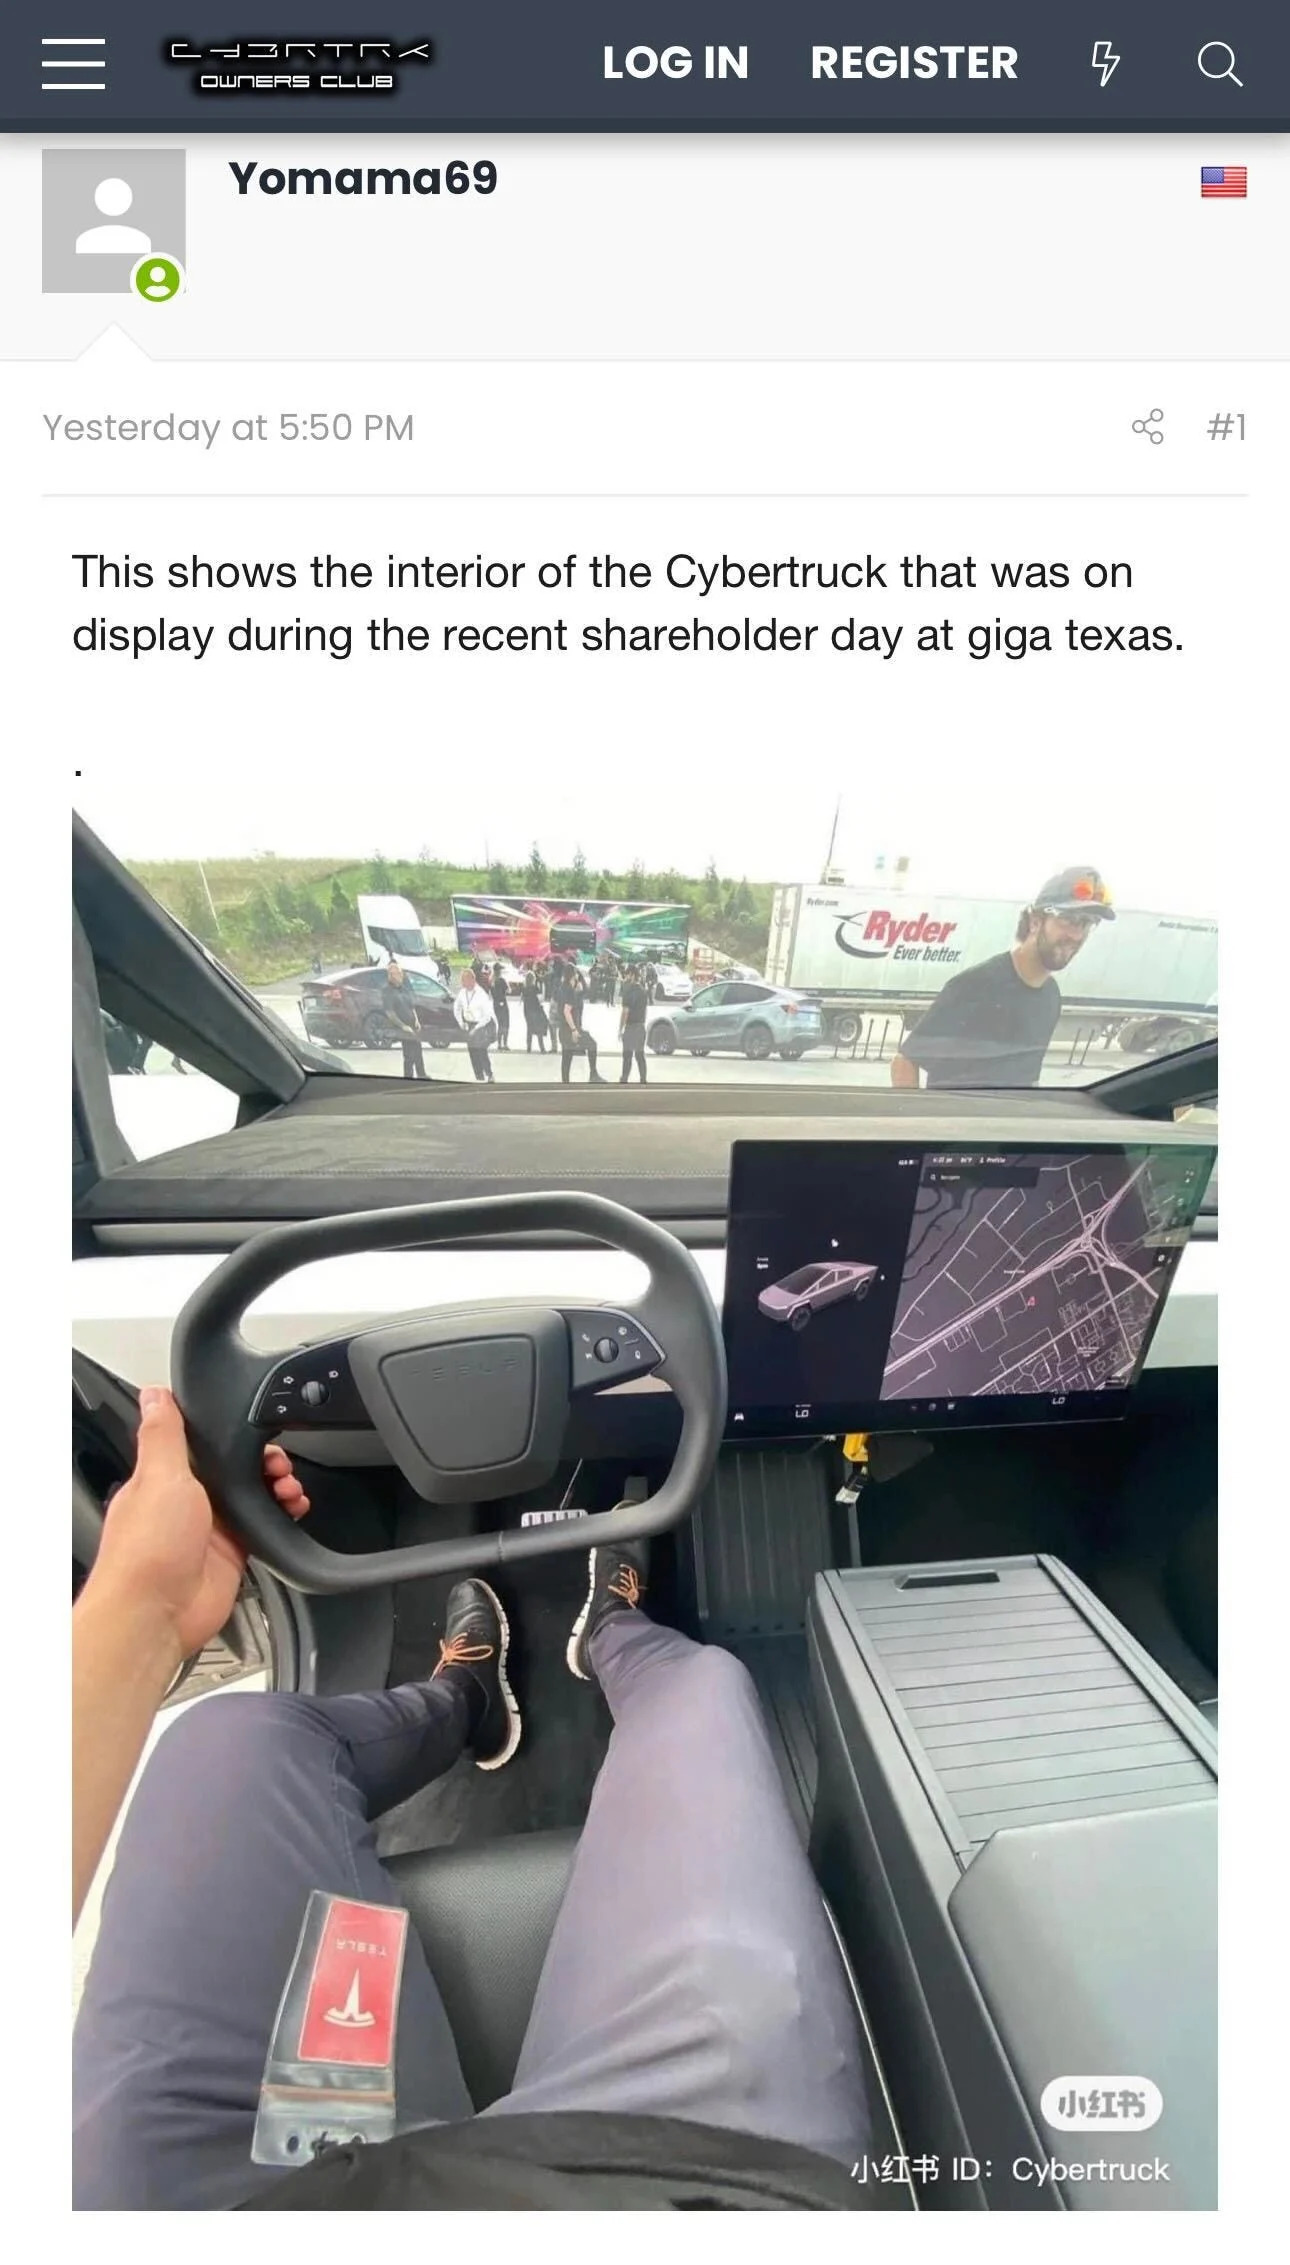 Screenshot of a post on Cybertruck Owners Cluh containing photos of Tesla's Cybertruck interior